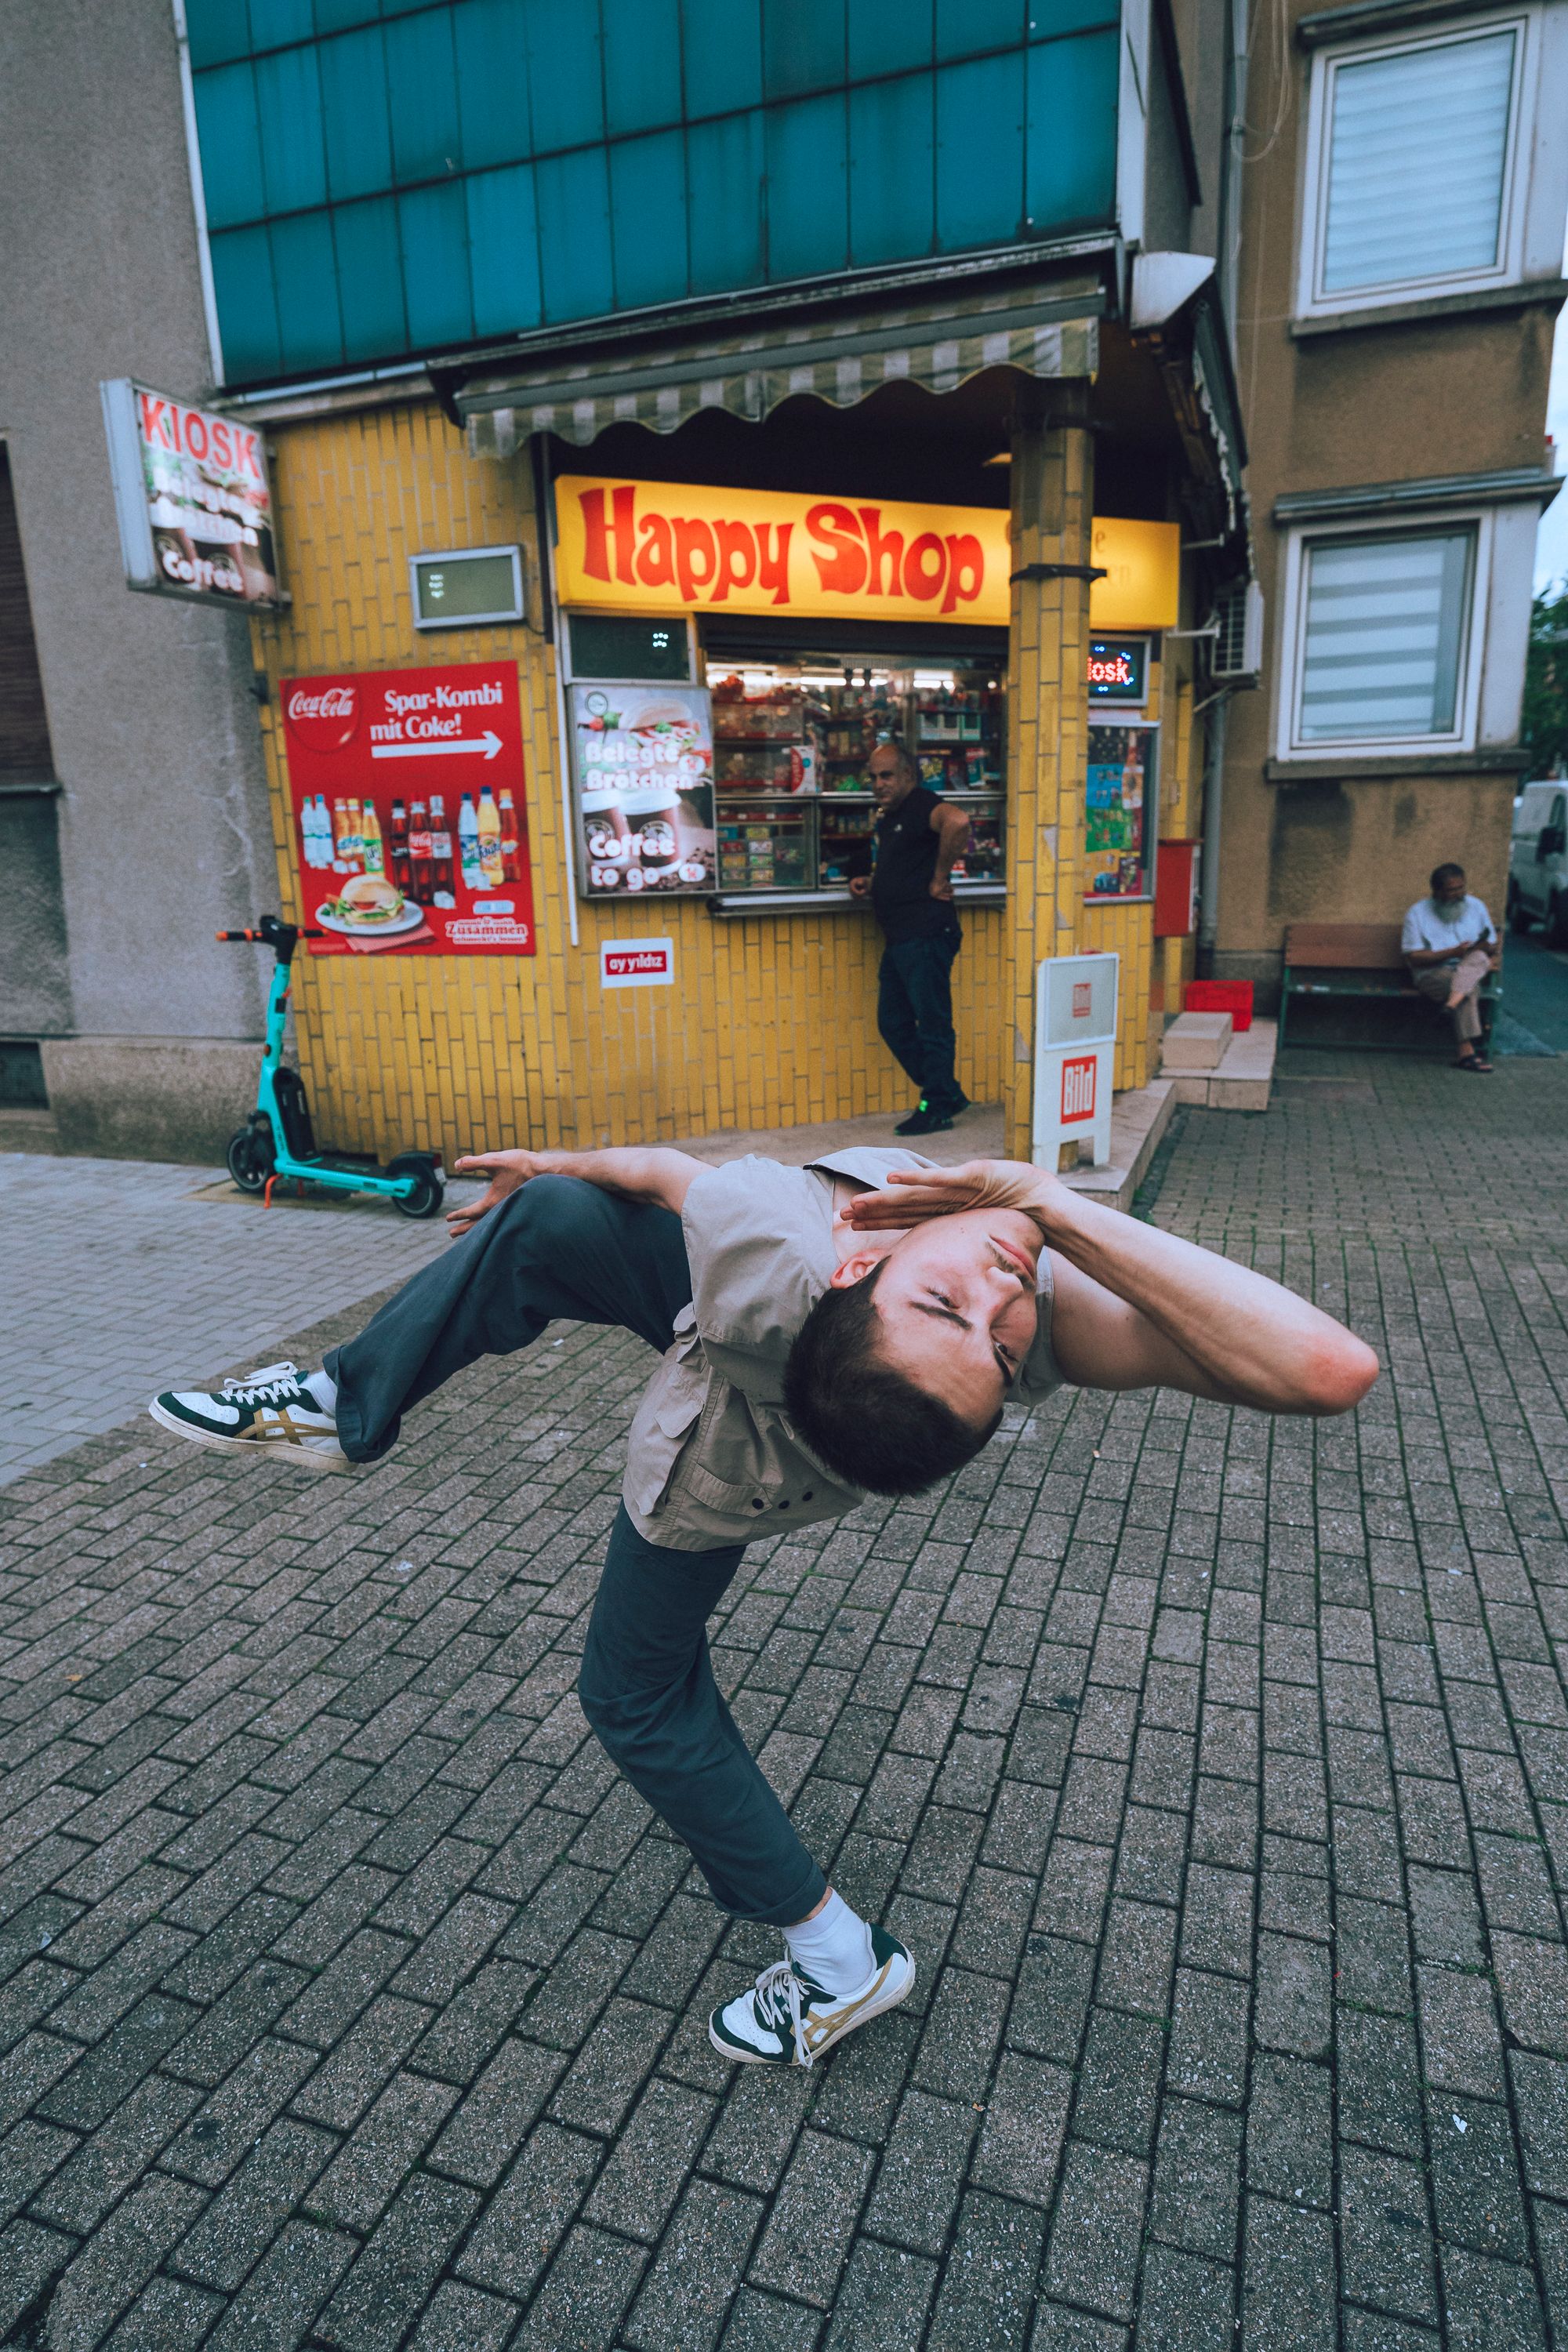 A dancer can be seen in front of a shop.